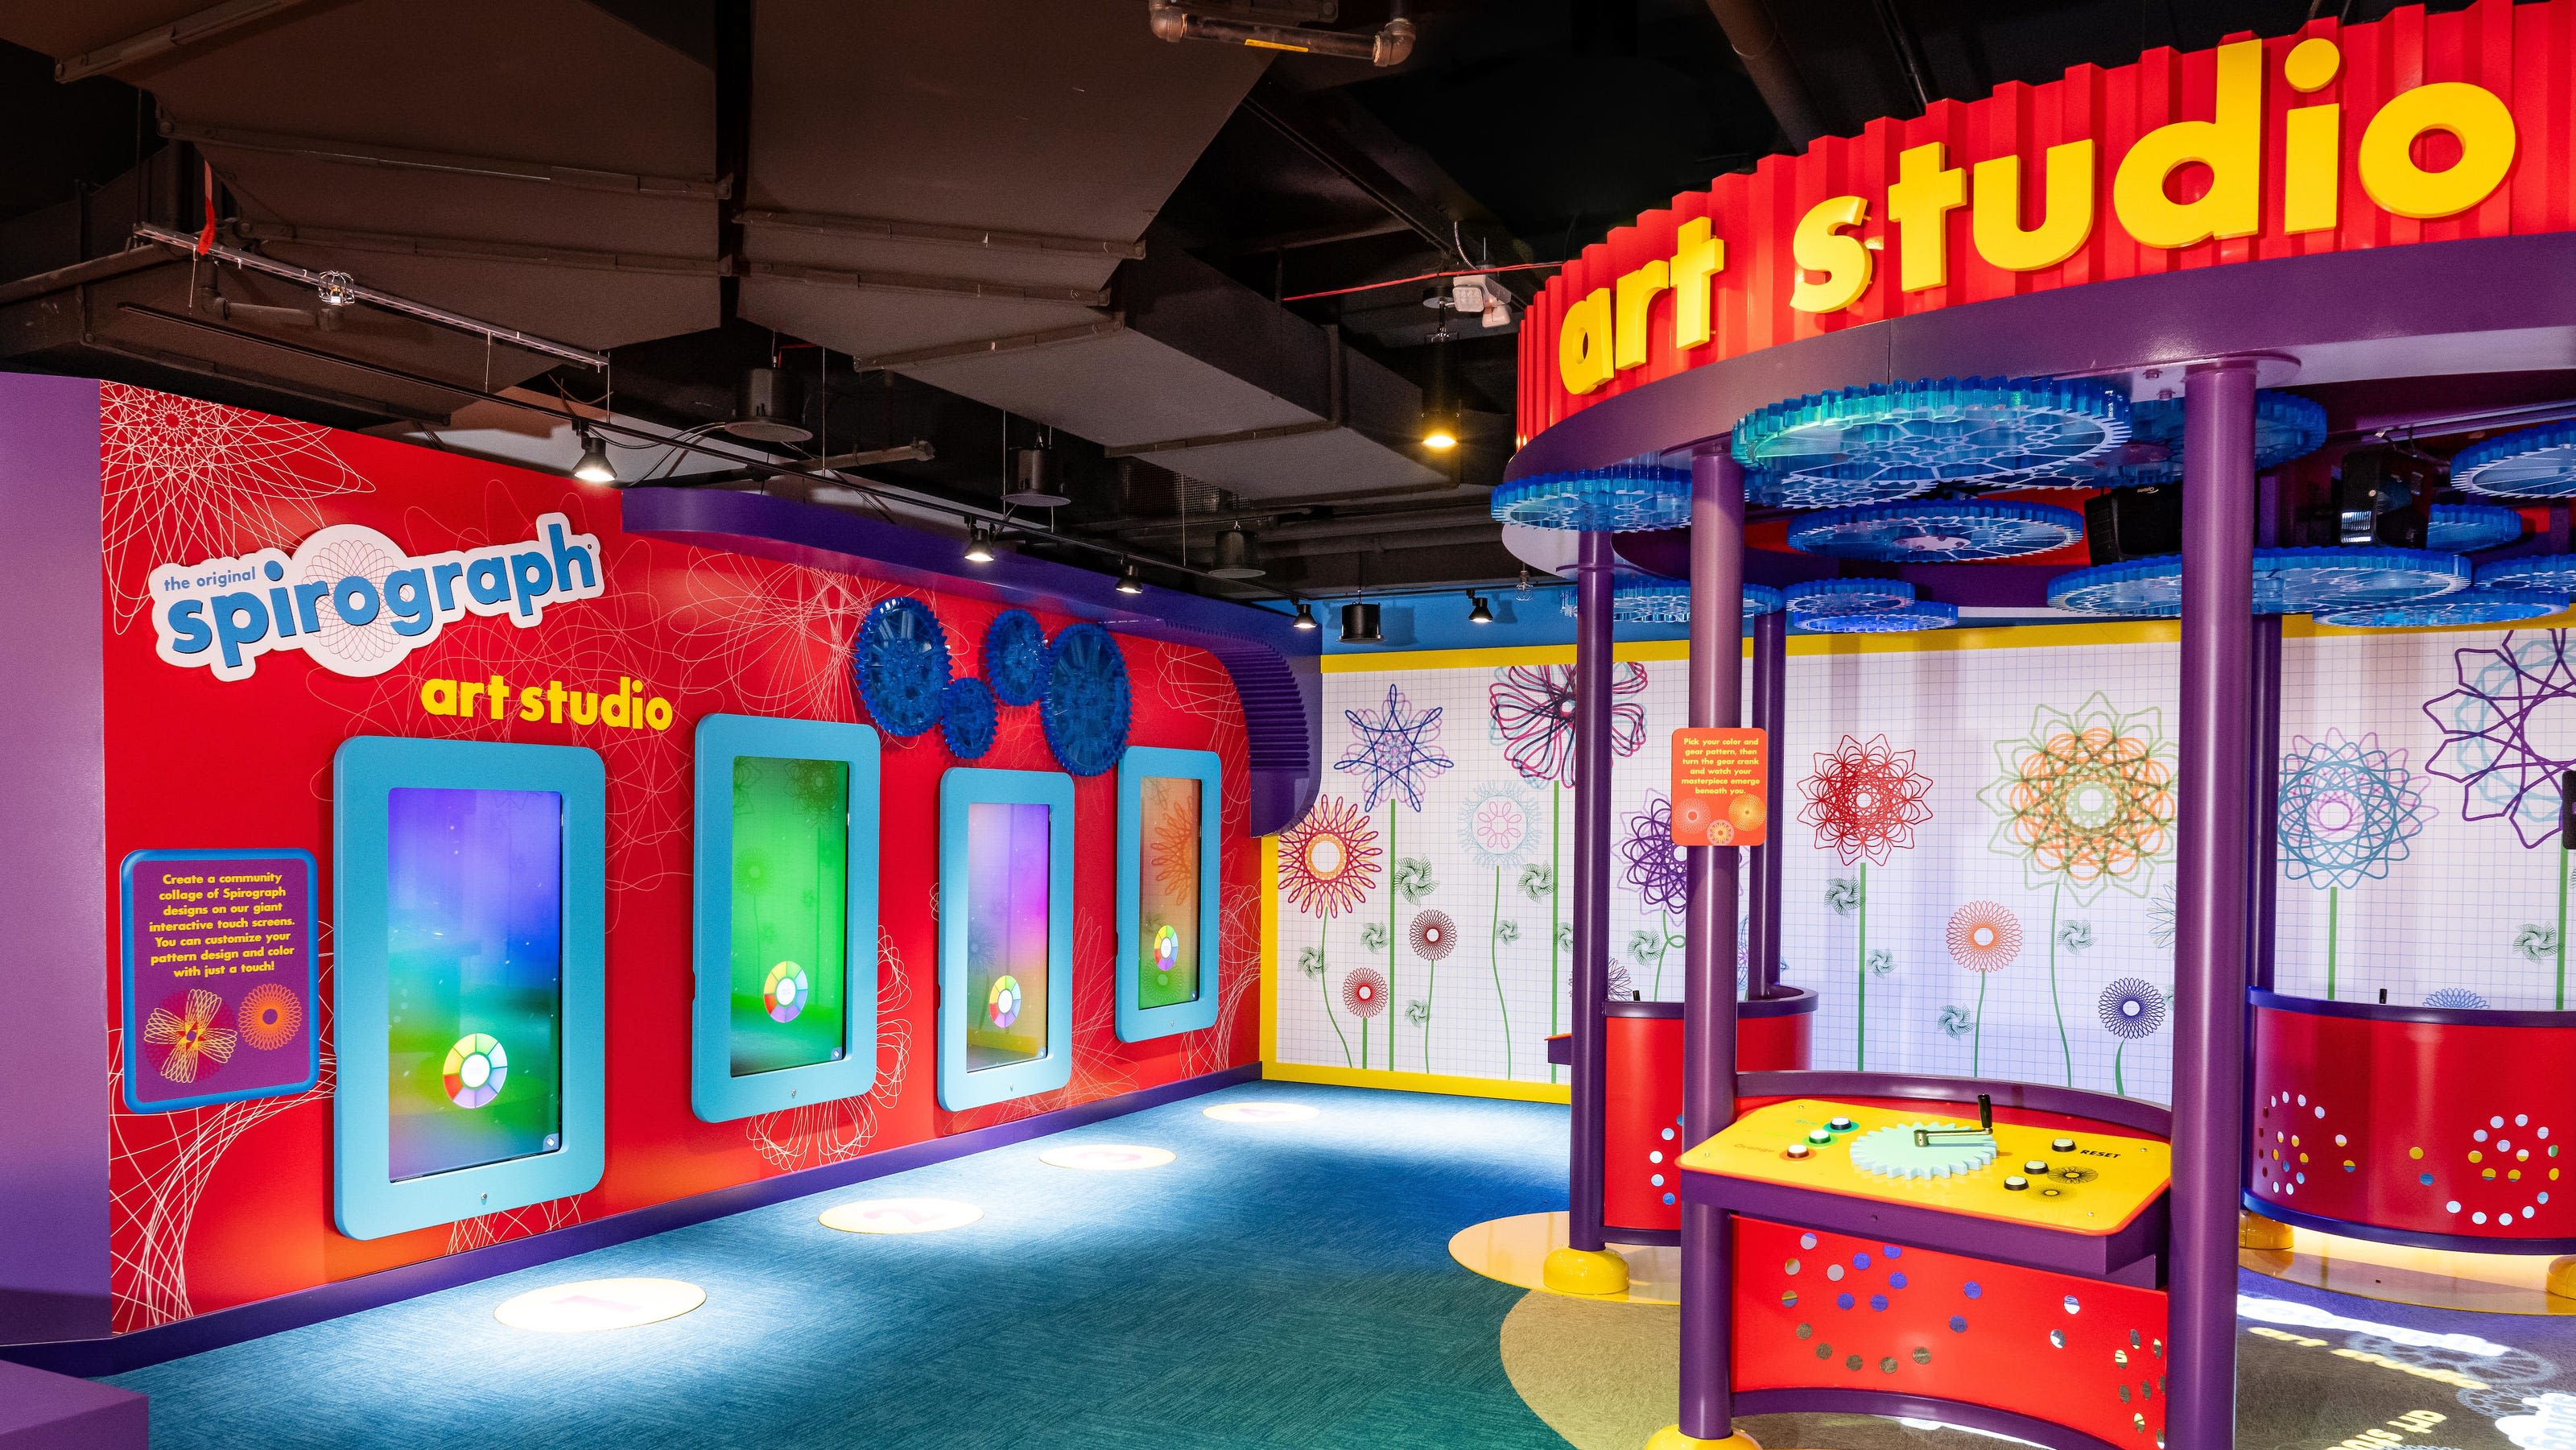 Garden State Plaza opens play center featuring Hasbro's Transformers, Play-Doh, Tinkertoy